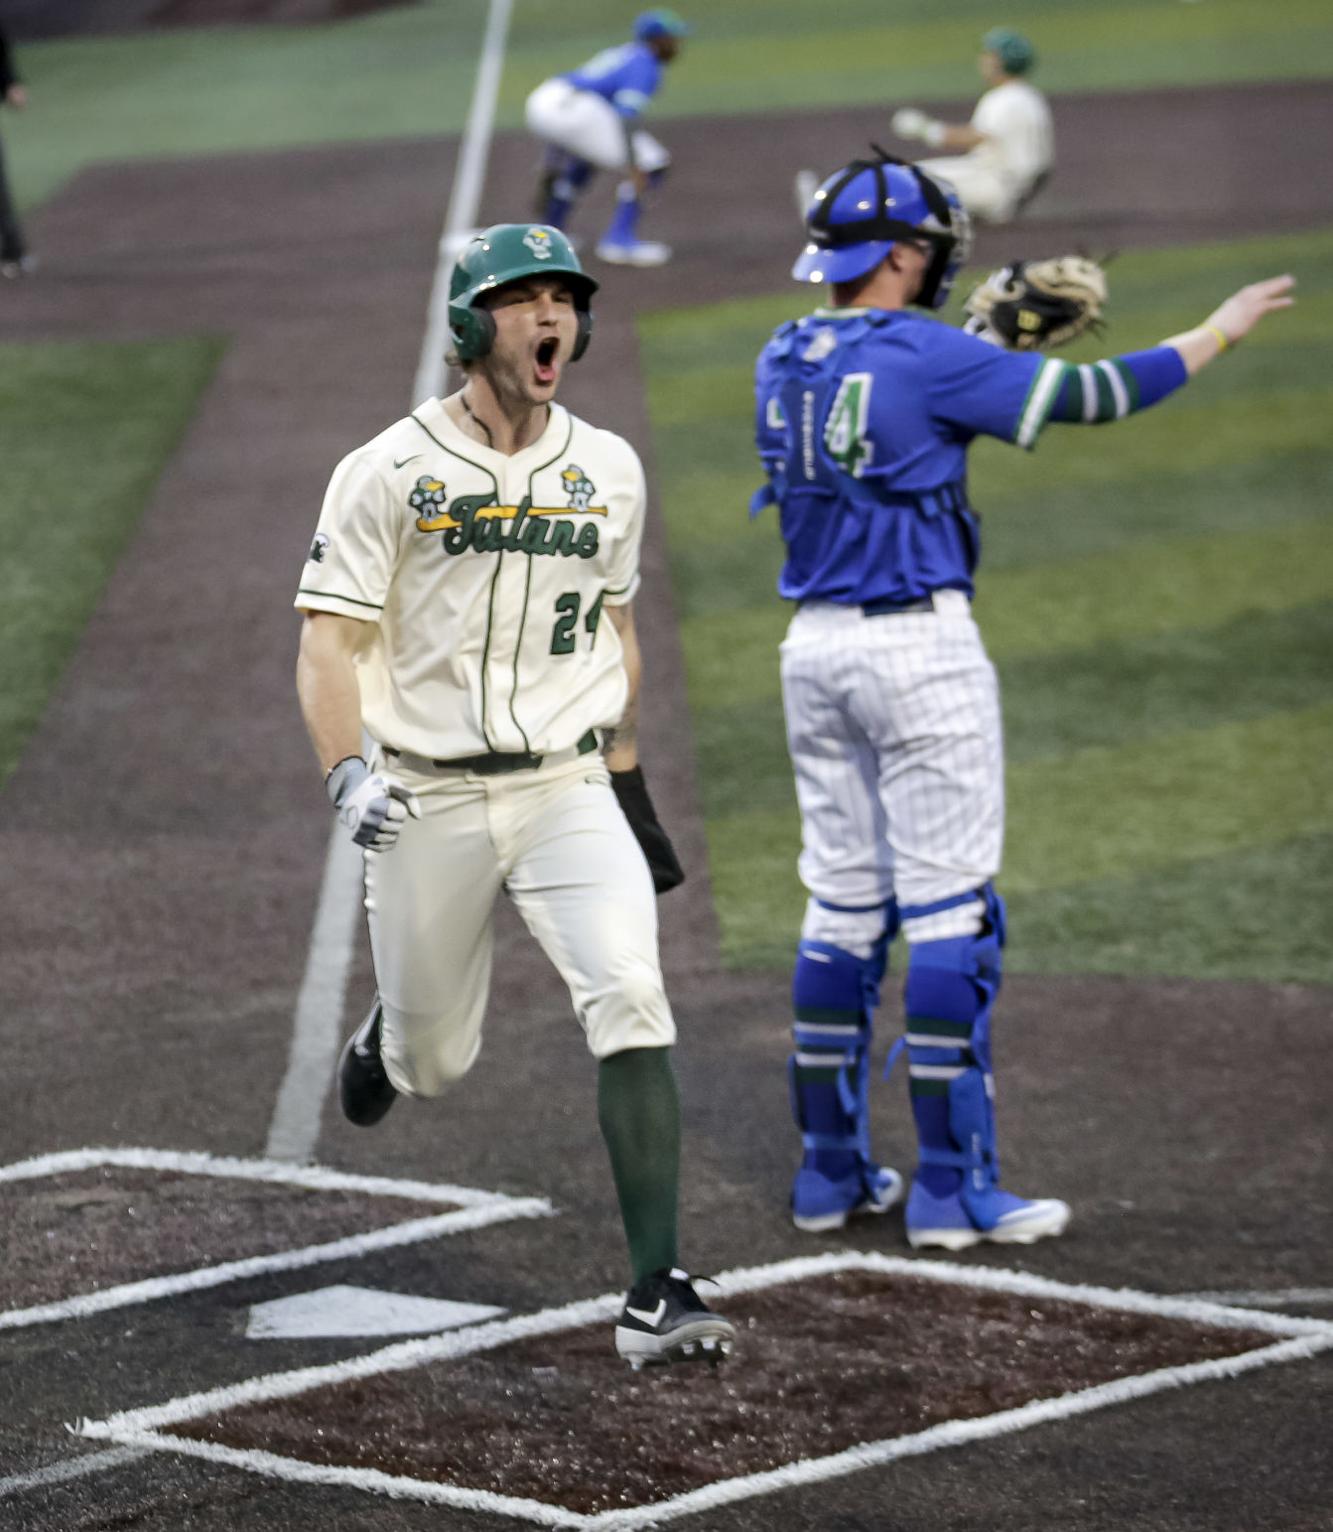 Different test how will Tulane baseball team react to first downer